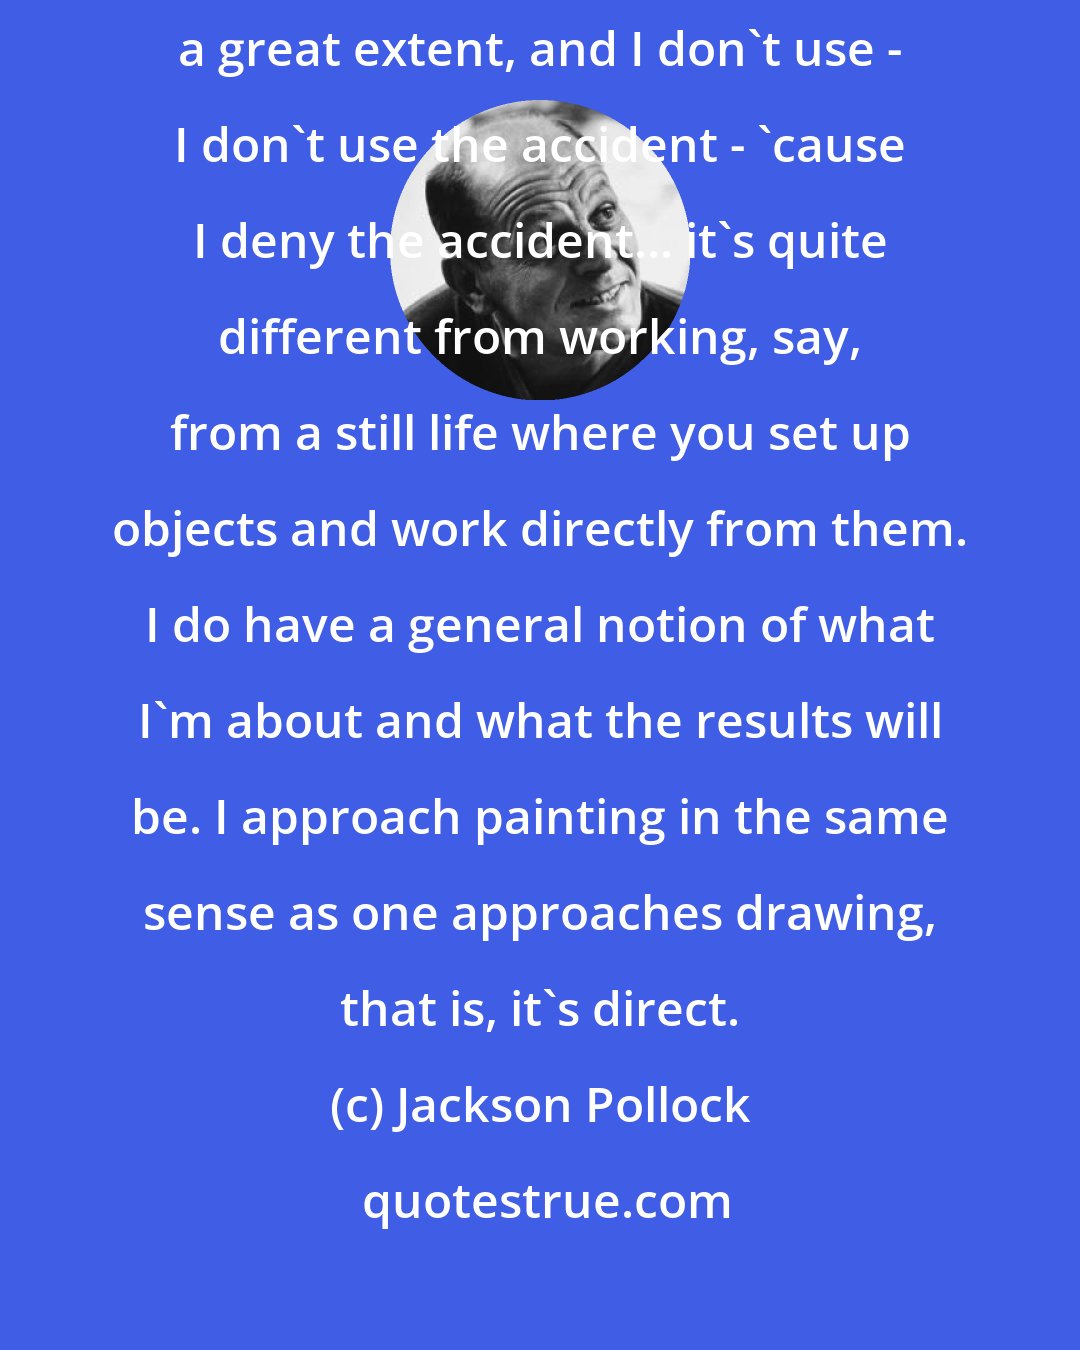 Jackson Pollock: With experience it seems to be possible to control the flow of paint, to a great extent, and I don't use - I don't use the accident - 'cause I deny the accident... it's quite different from working, say, from a still life where you set up objects and work directly from them. I do have a general notion of what I'm about and what the results will be. I approach painting in the same sense as one approaches drawing, that is, it's direct.